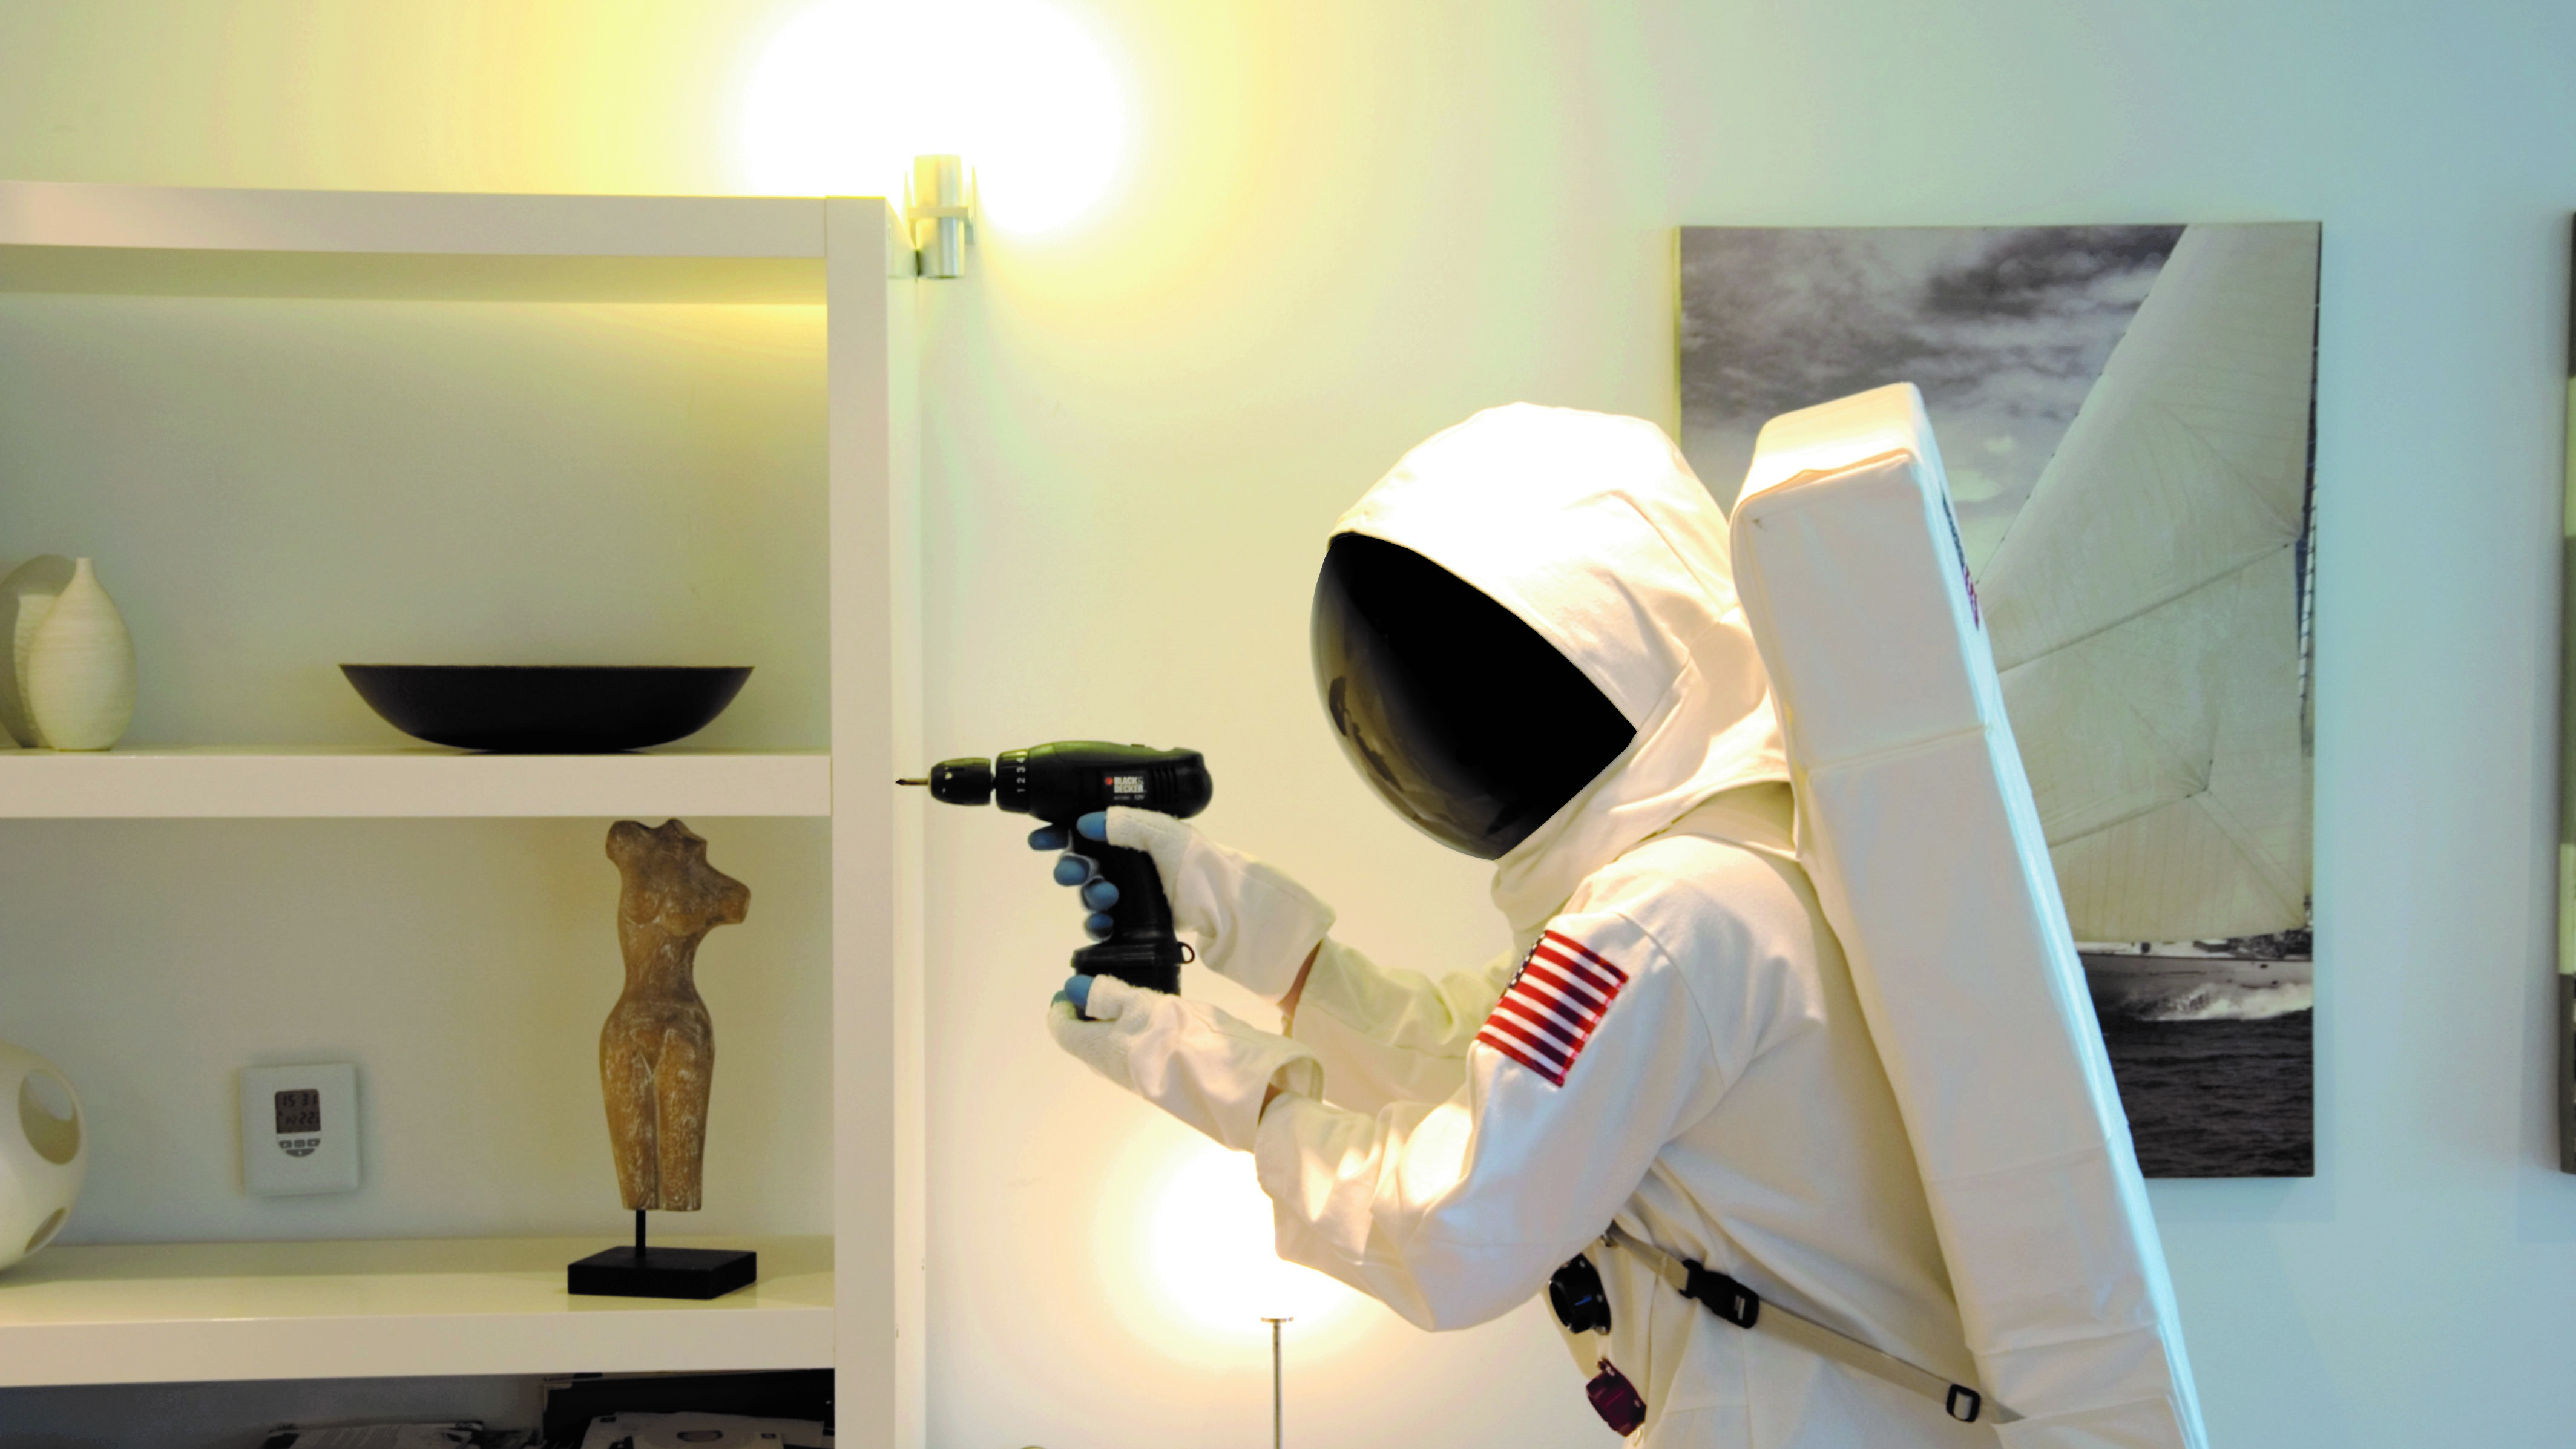 A person in an astronaut costume uses a cordless drill at home.